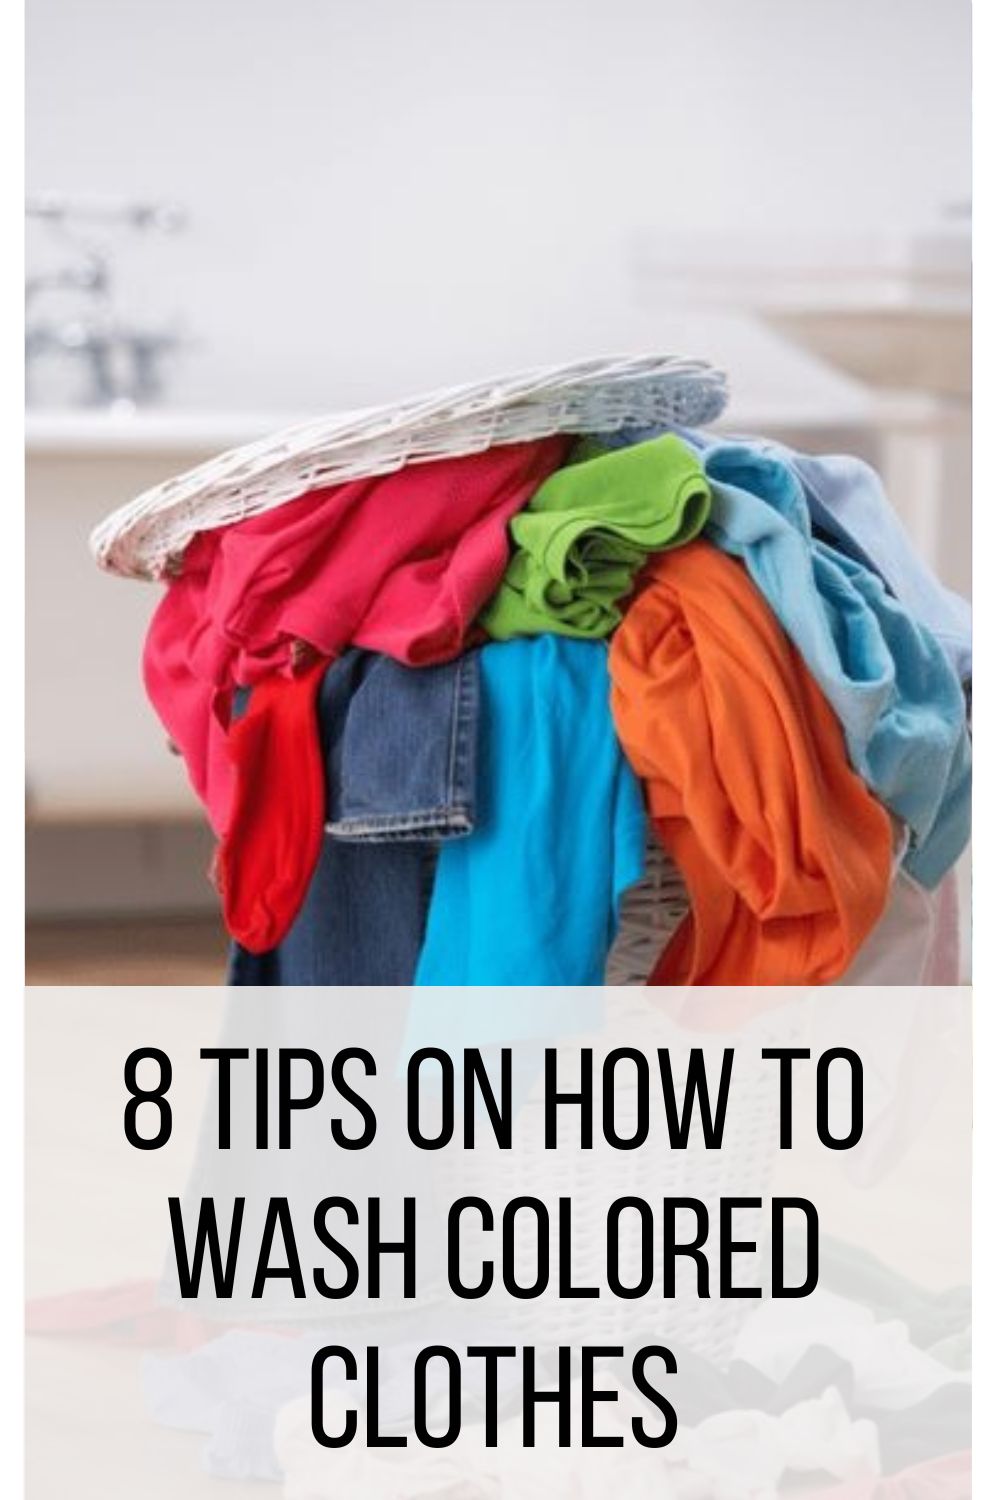 8 Tips On How to Wash Colored Clothes